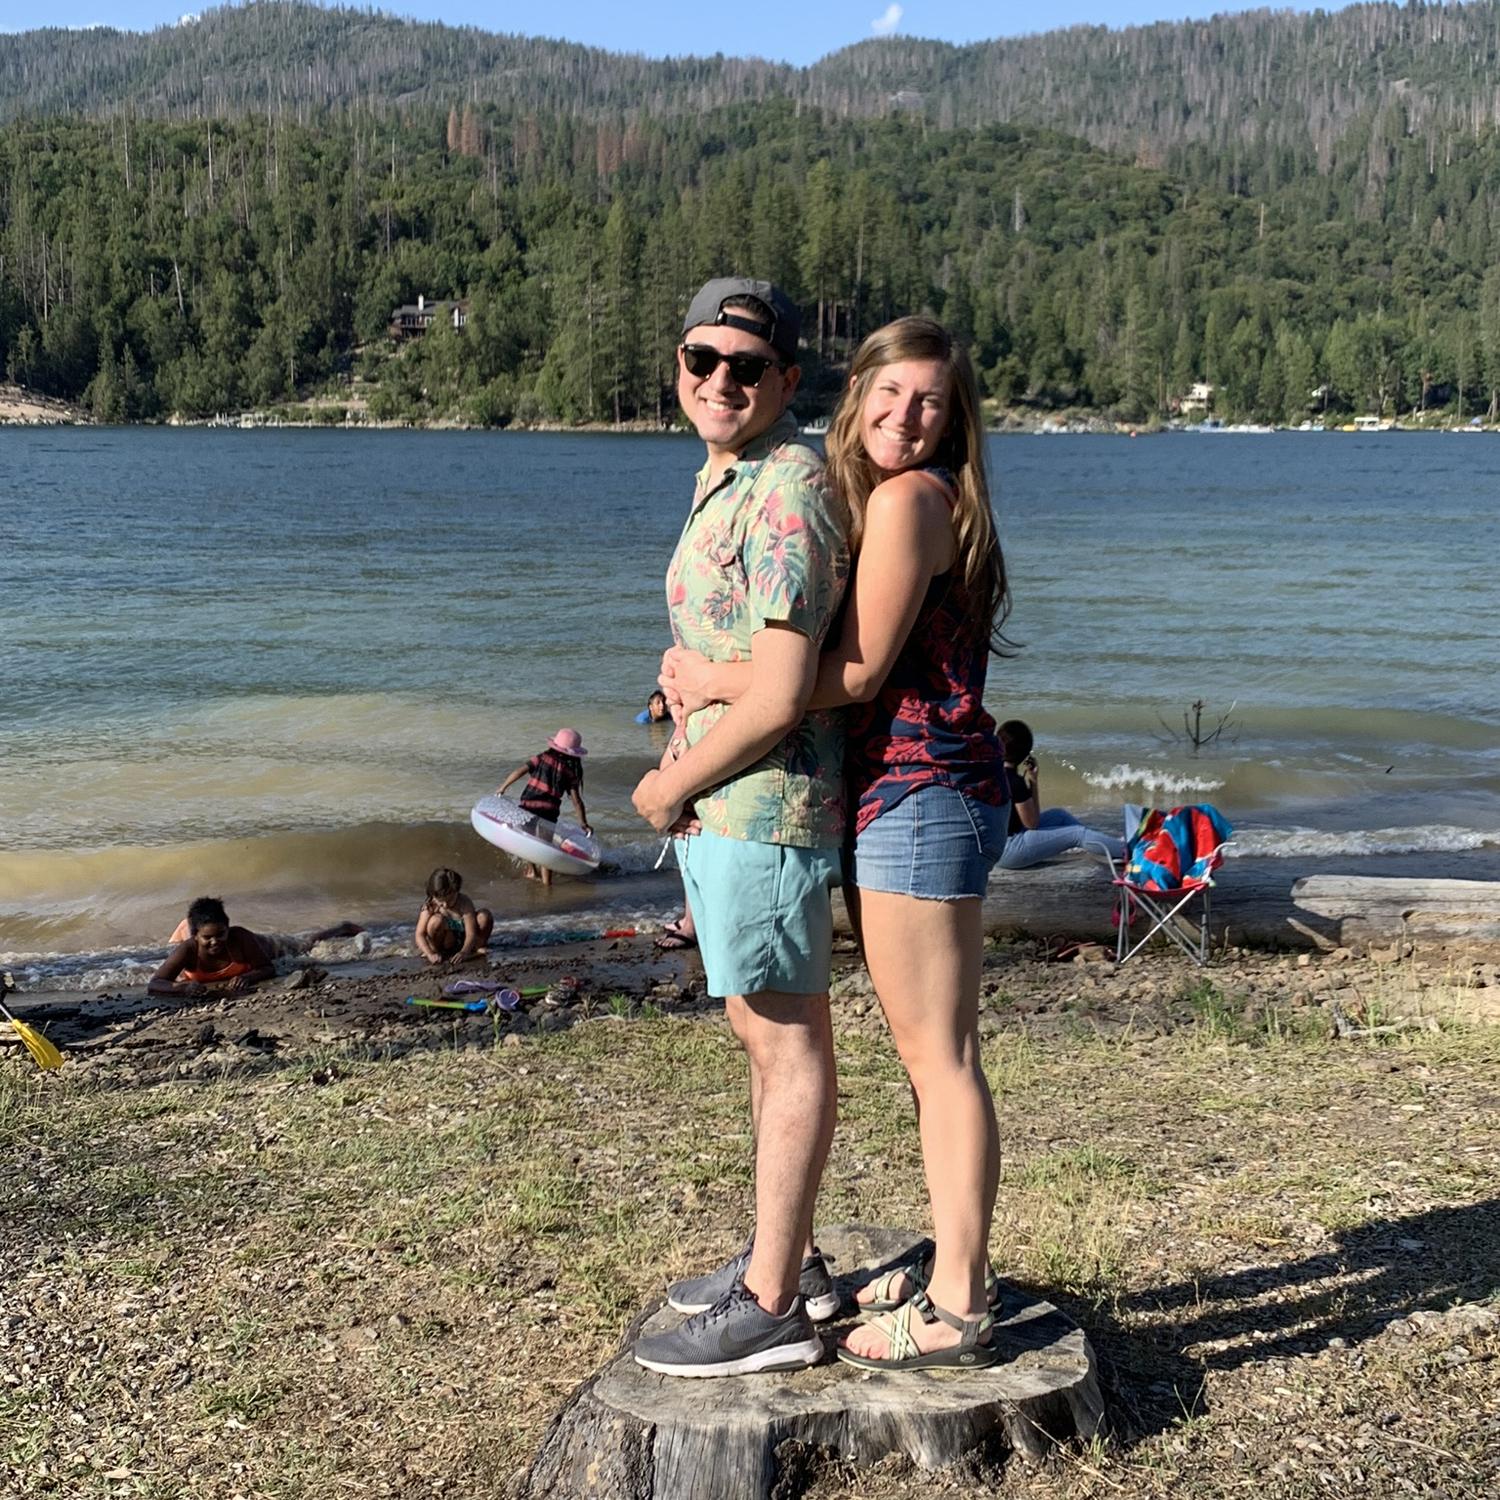 Our first trip to Bass Lake, 2 months into dating!